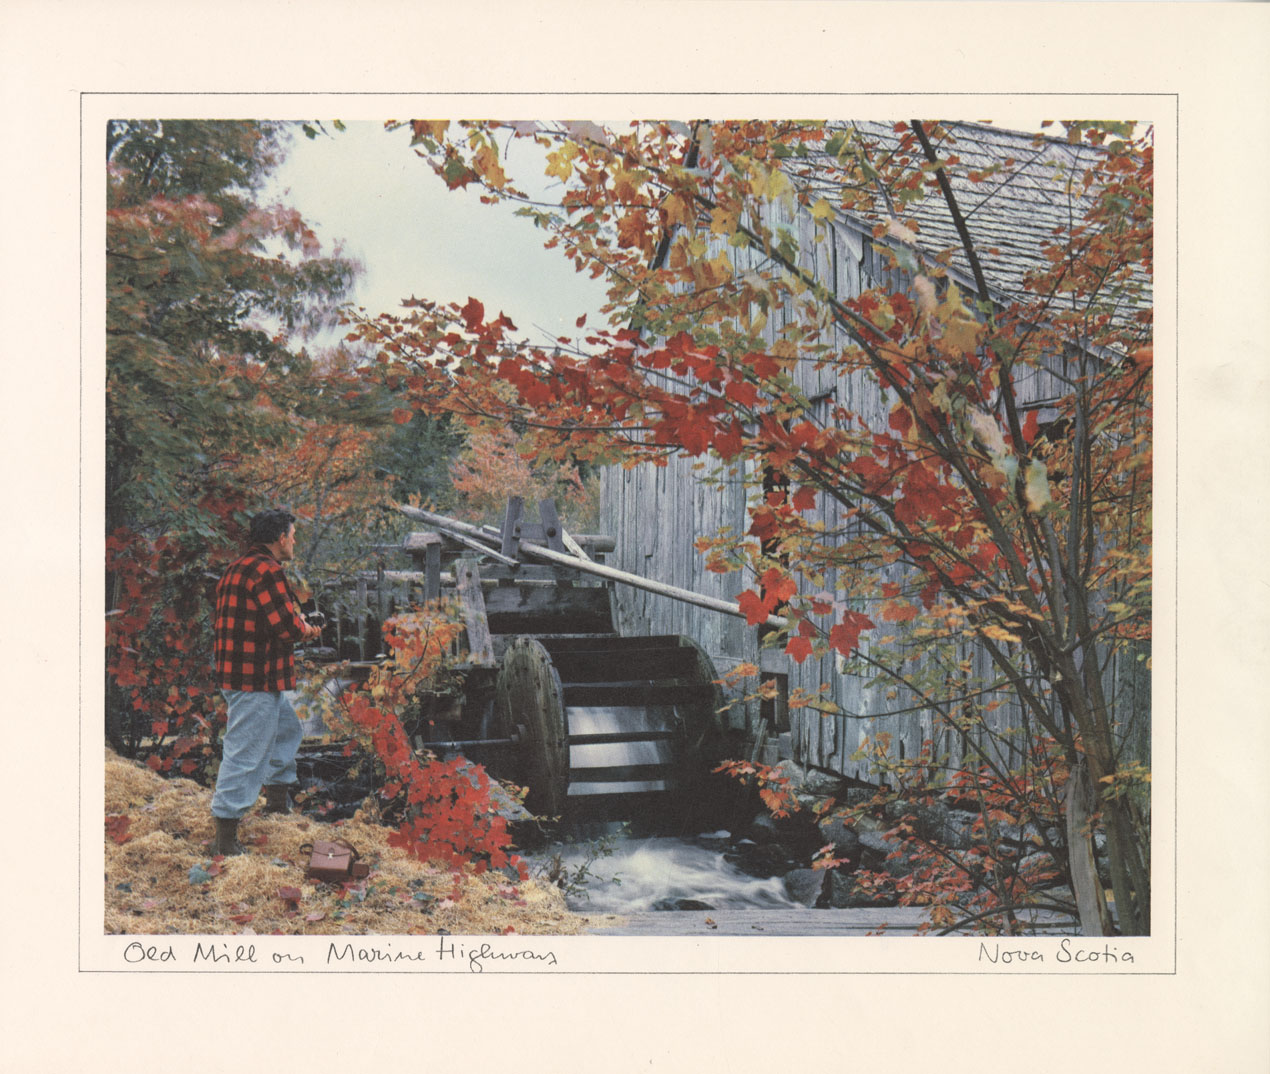 Book Jackets, Advertisements, and Art Reproductions: Atlantic Pavillion Photos of NS (from expo '67): Old Mill on Marine Highway